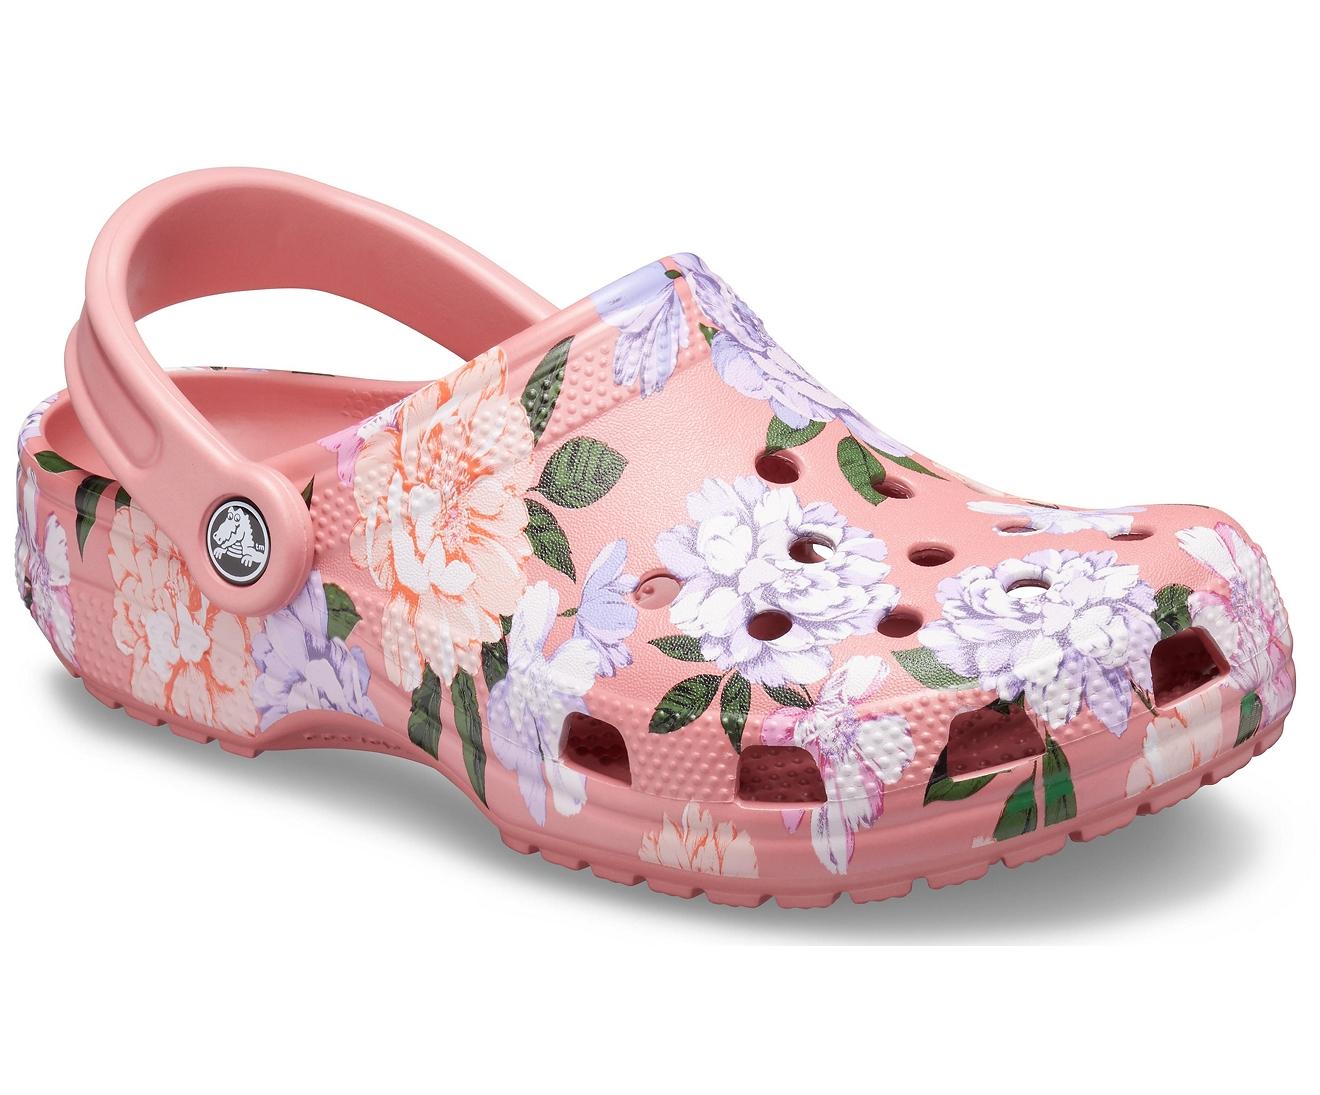 Crocs™ Blossom Classic Printed Floral Clog in Pink - Lyst